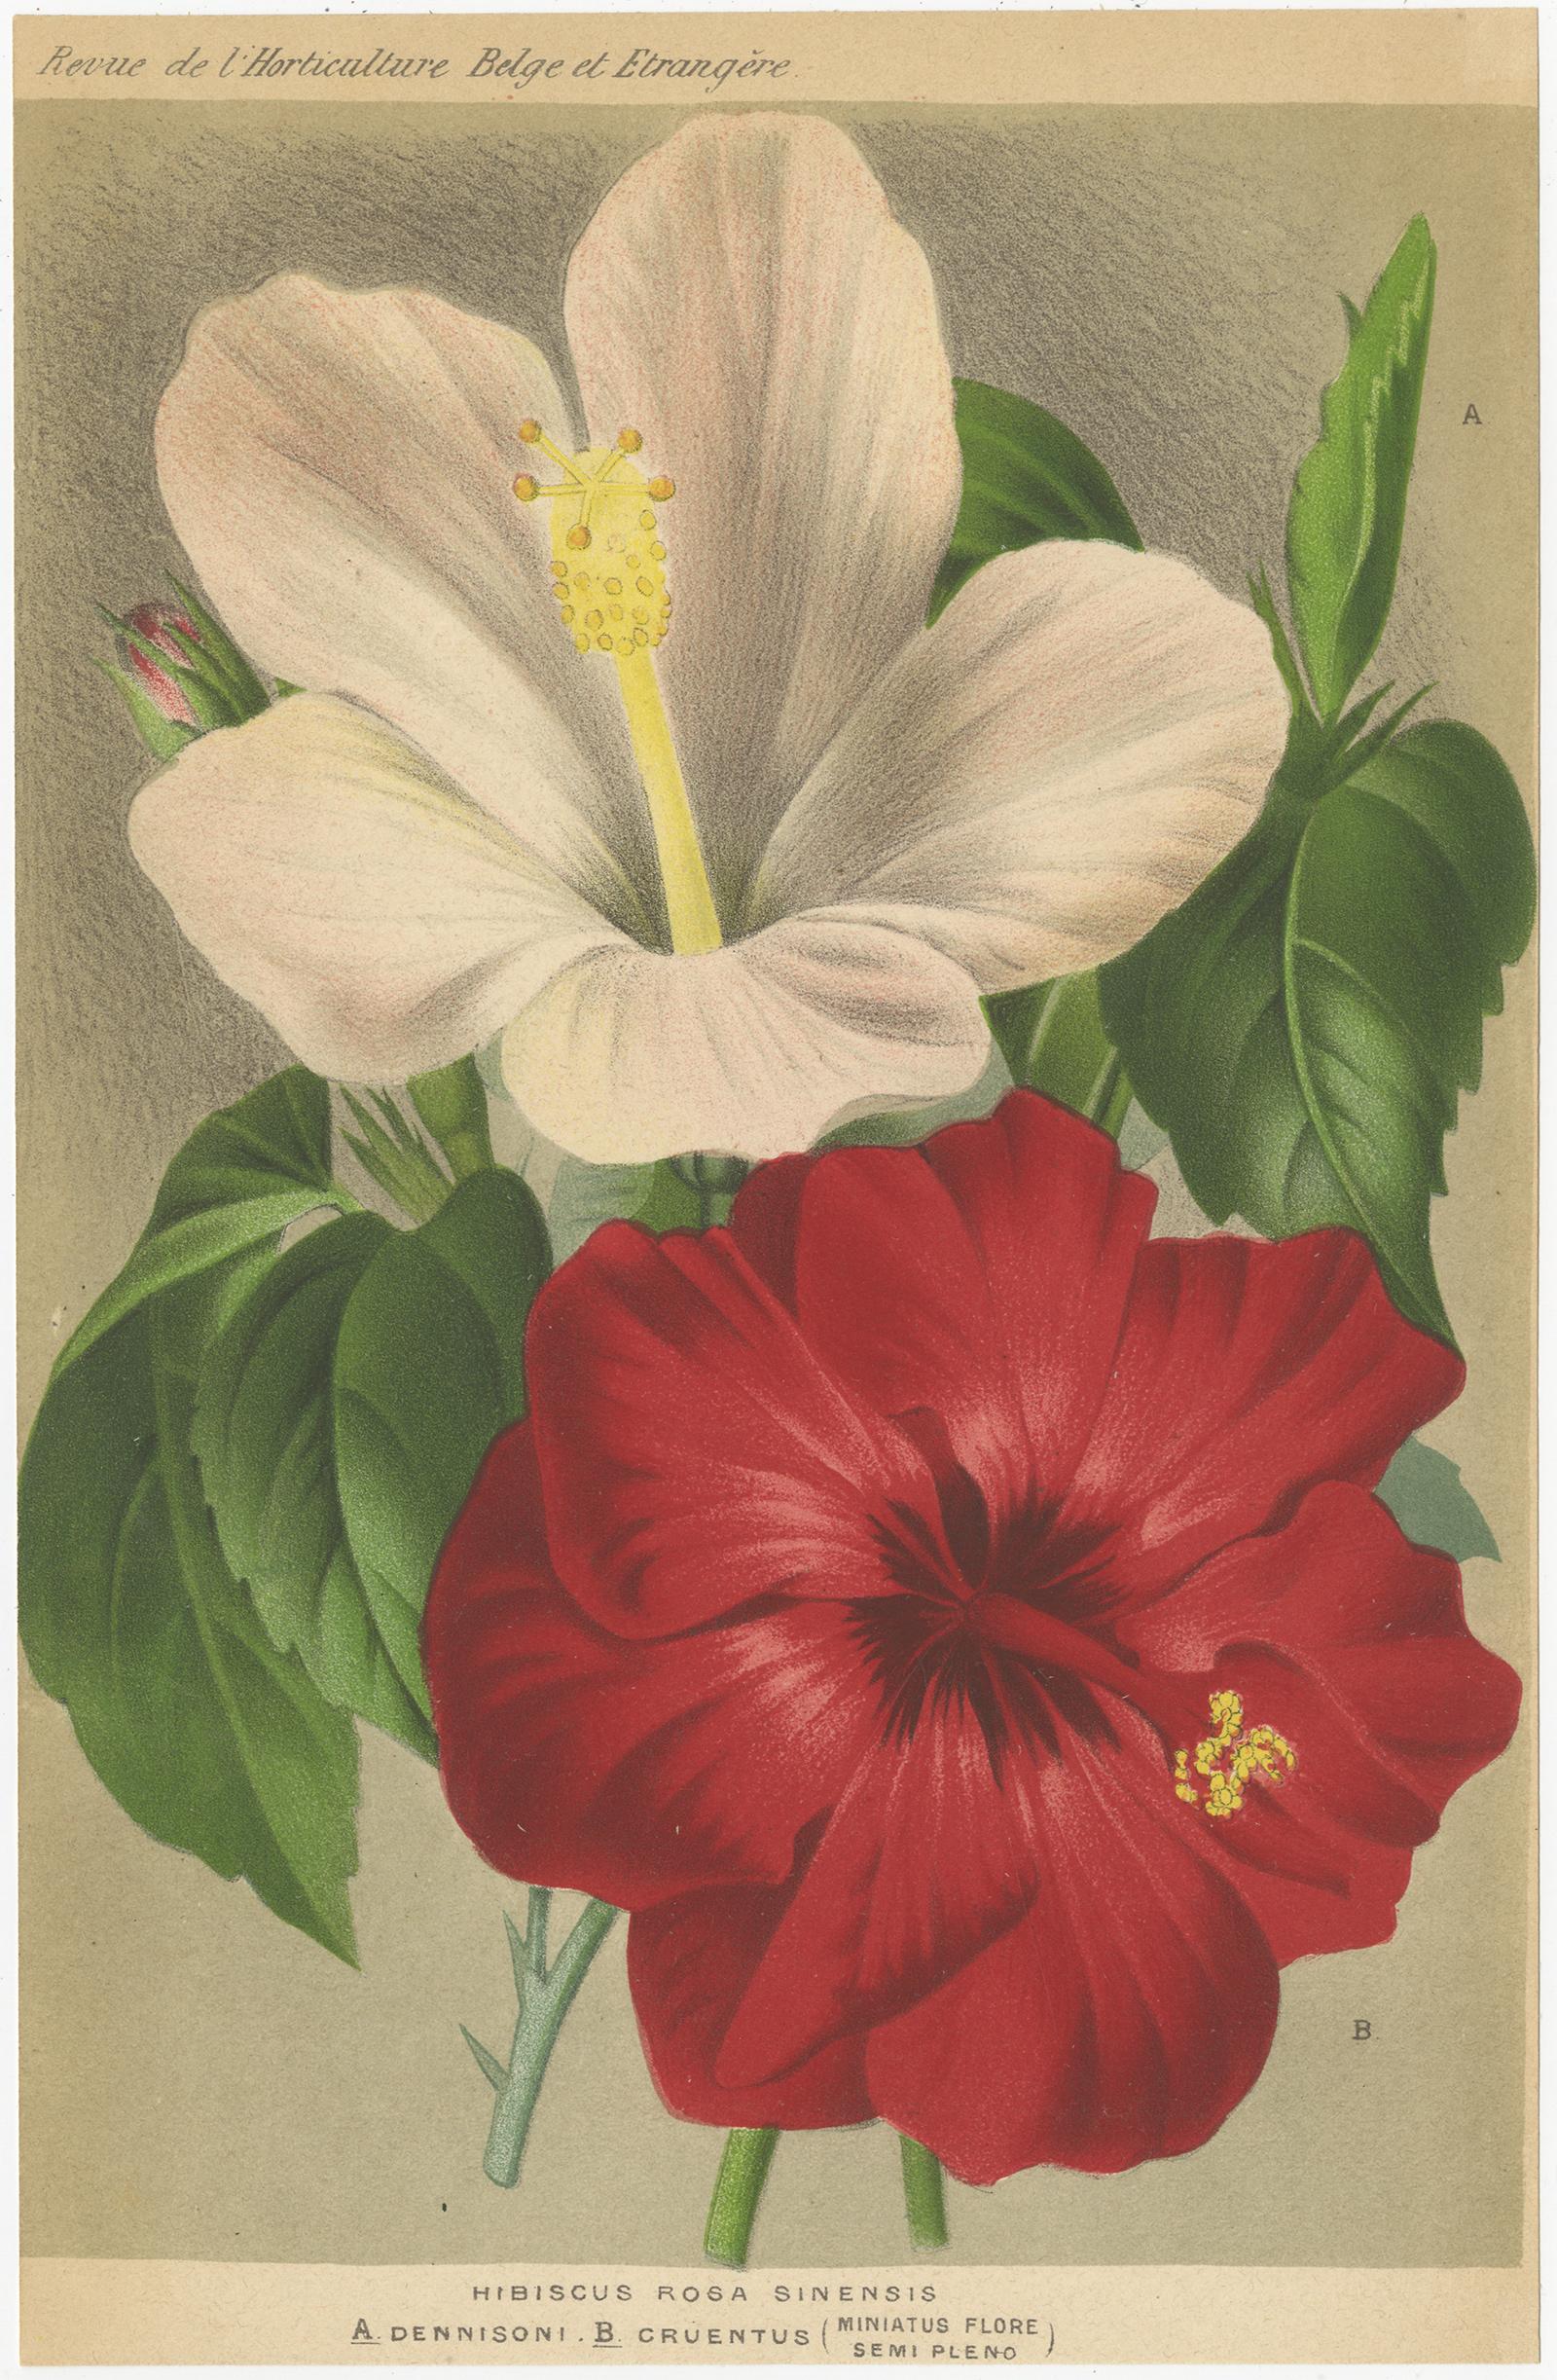 Set of two antique botany prints titled 'Hibiscus Rosa Sinensis - Pavonia Wioti'. It shows the Hibiscus rosa-sinensis and pavonia plant. These prints originate from 'Revue de l'Horticulture Belge et Étrangère', published between 1875 and 1914.